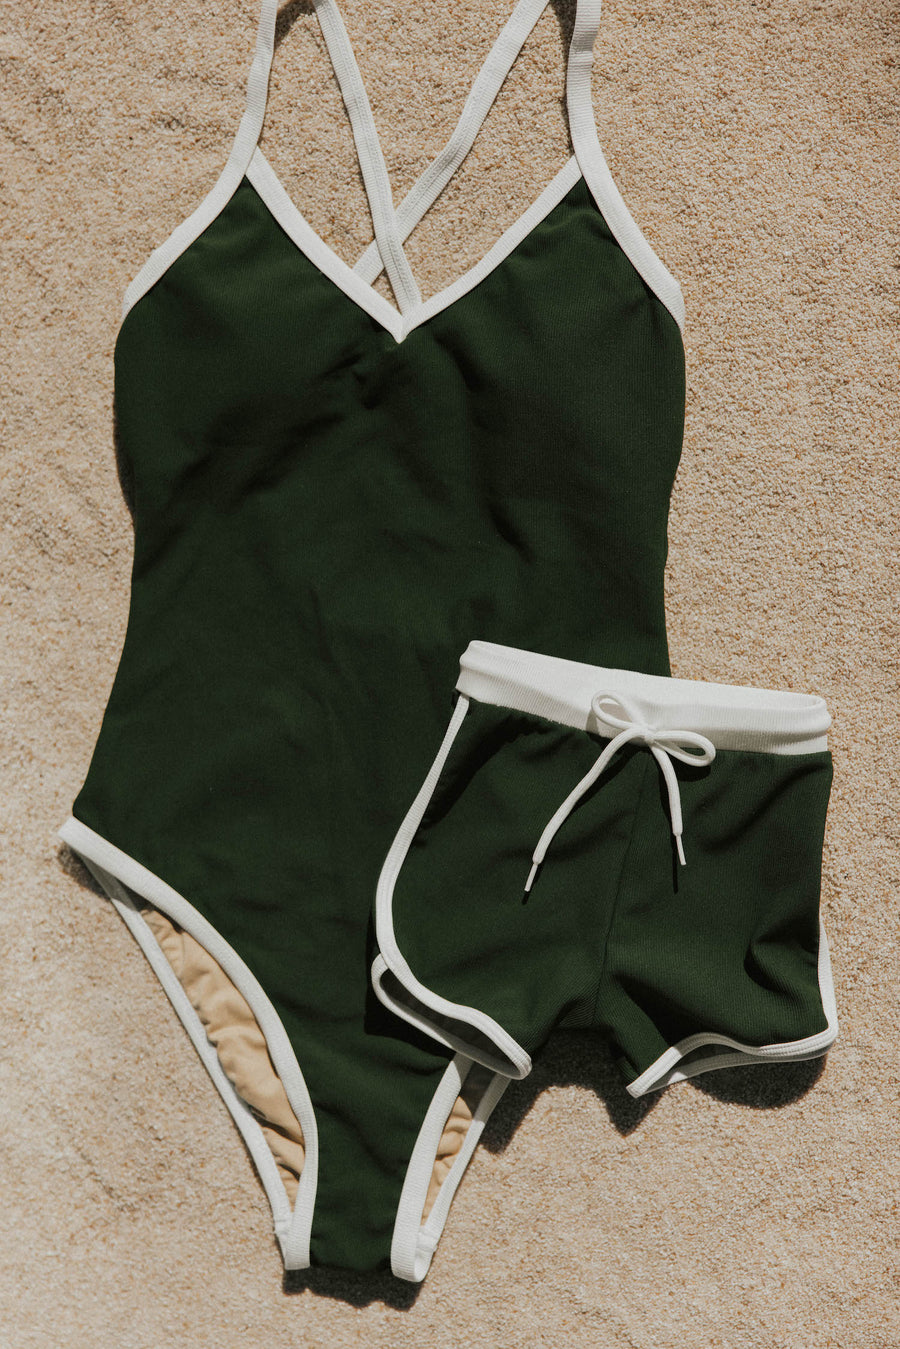 Mommy and me family matching swimsuits dark green swimsuits